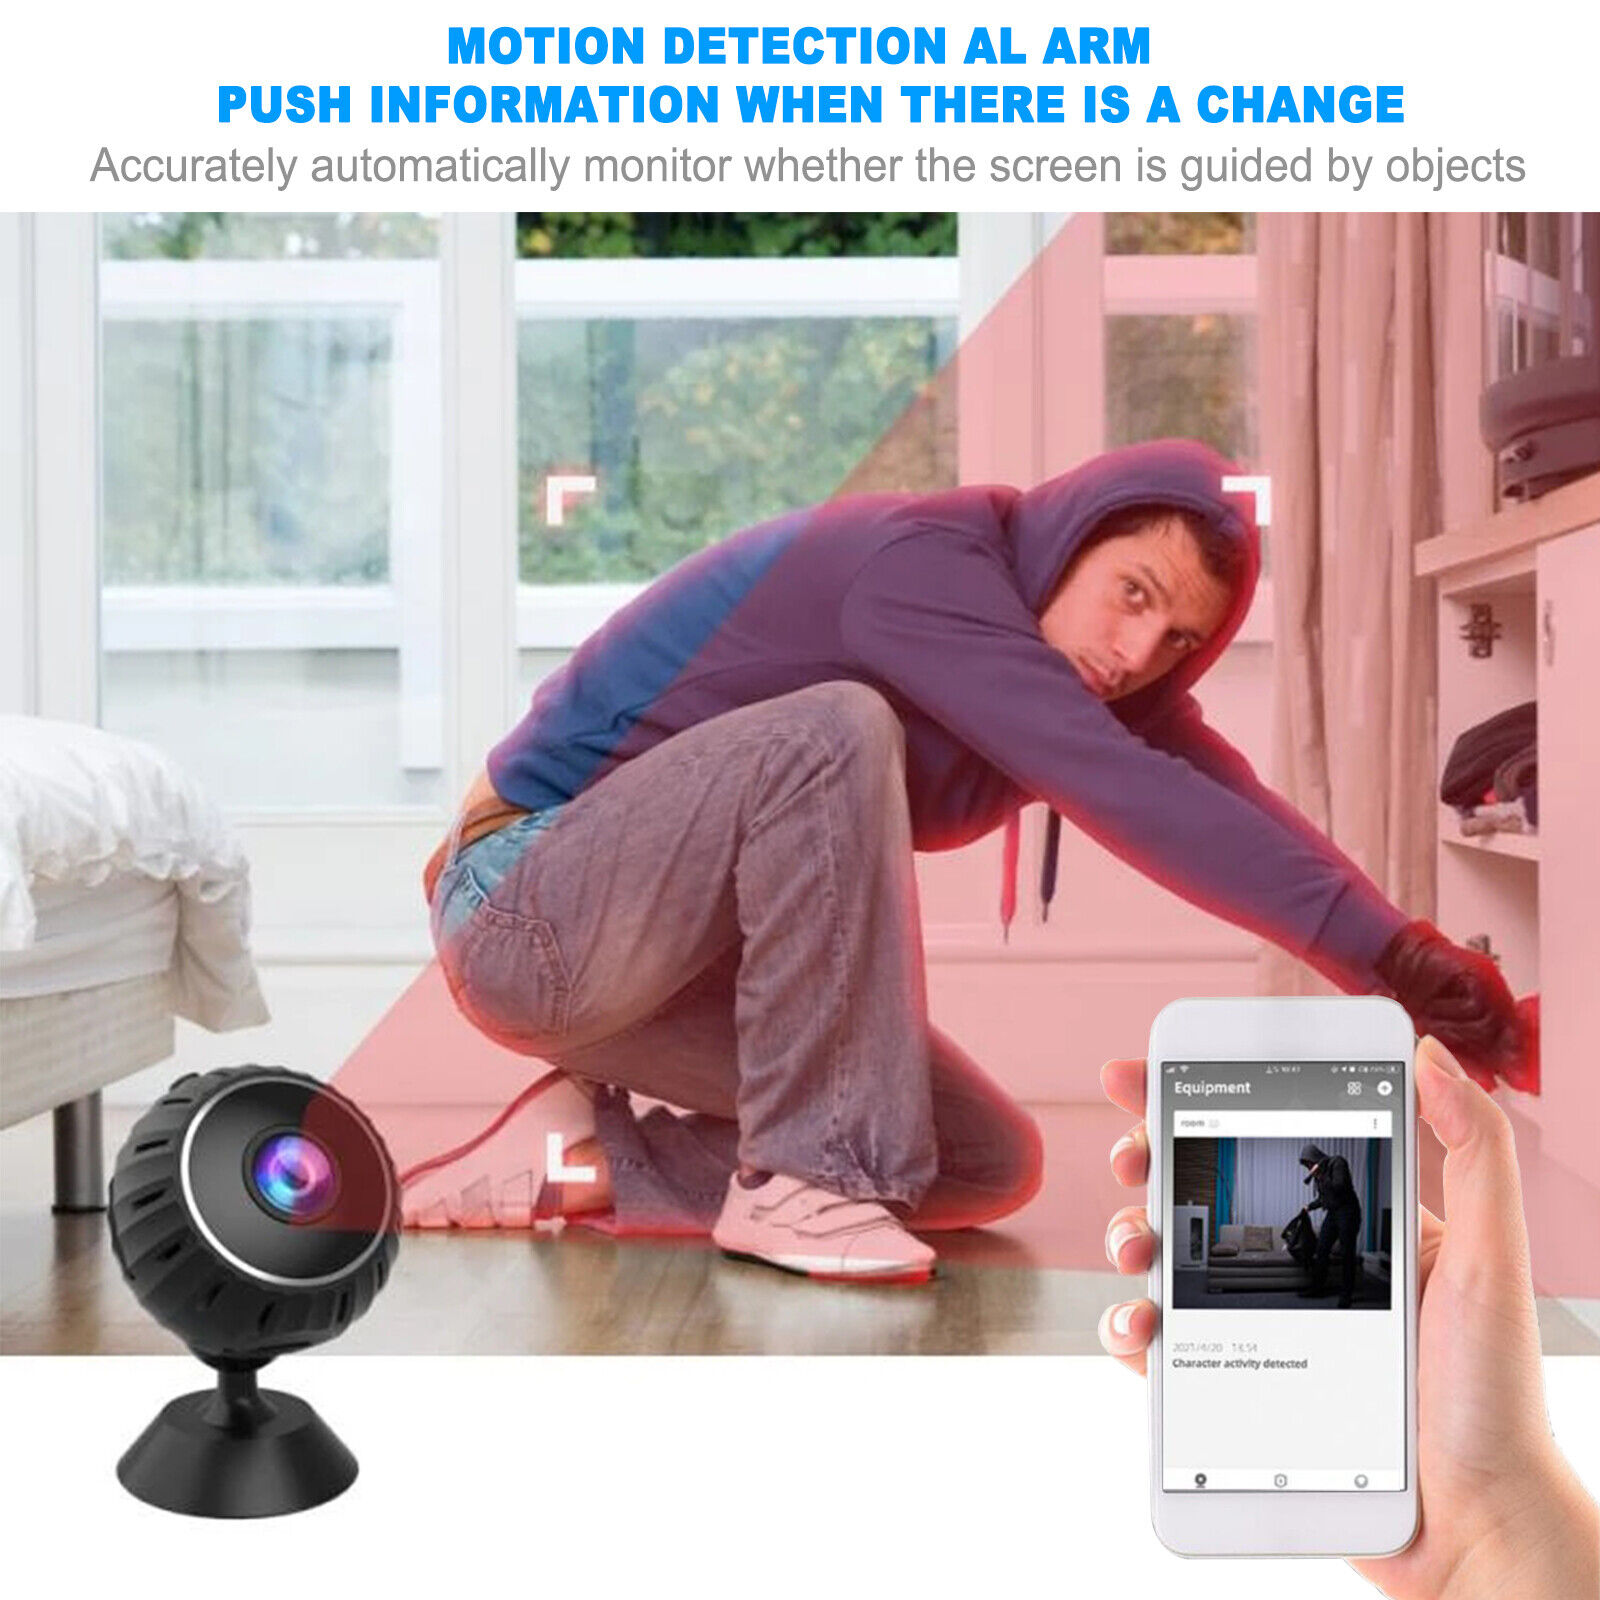 Security-Cameras-Mini-Camera-for-Home-Security-1080p-HD-Mini-IR-Camera-WiFi-Wireless-Small-Indoor-Nanny-Camera-Cell-Phone-APP-Control-with-A-Wide-Angle-Remote-View-15